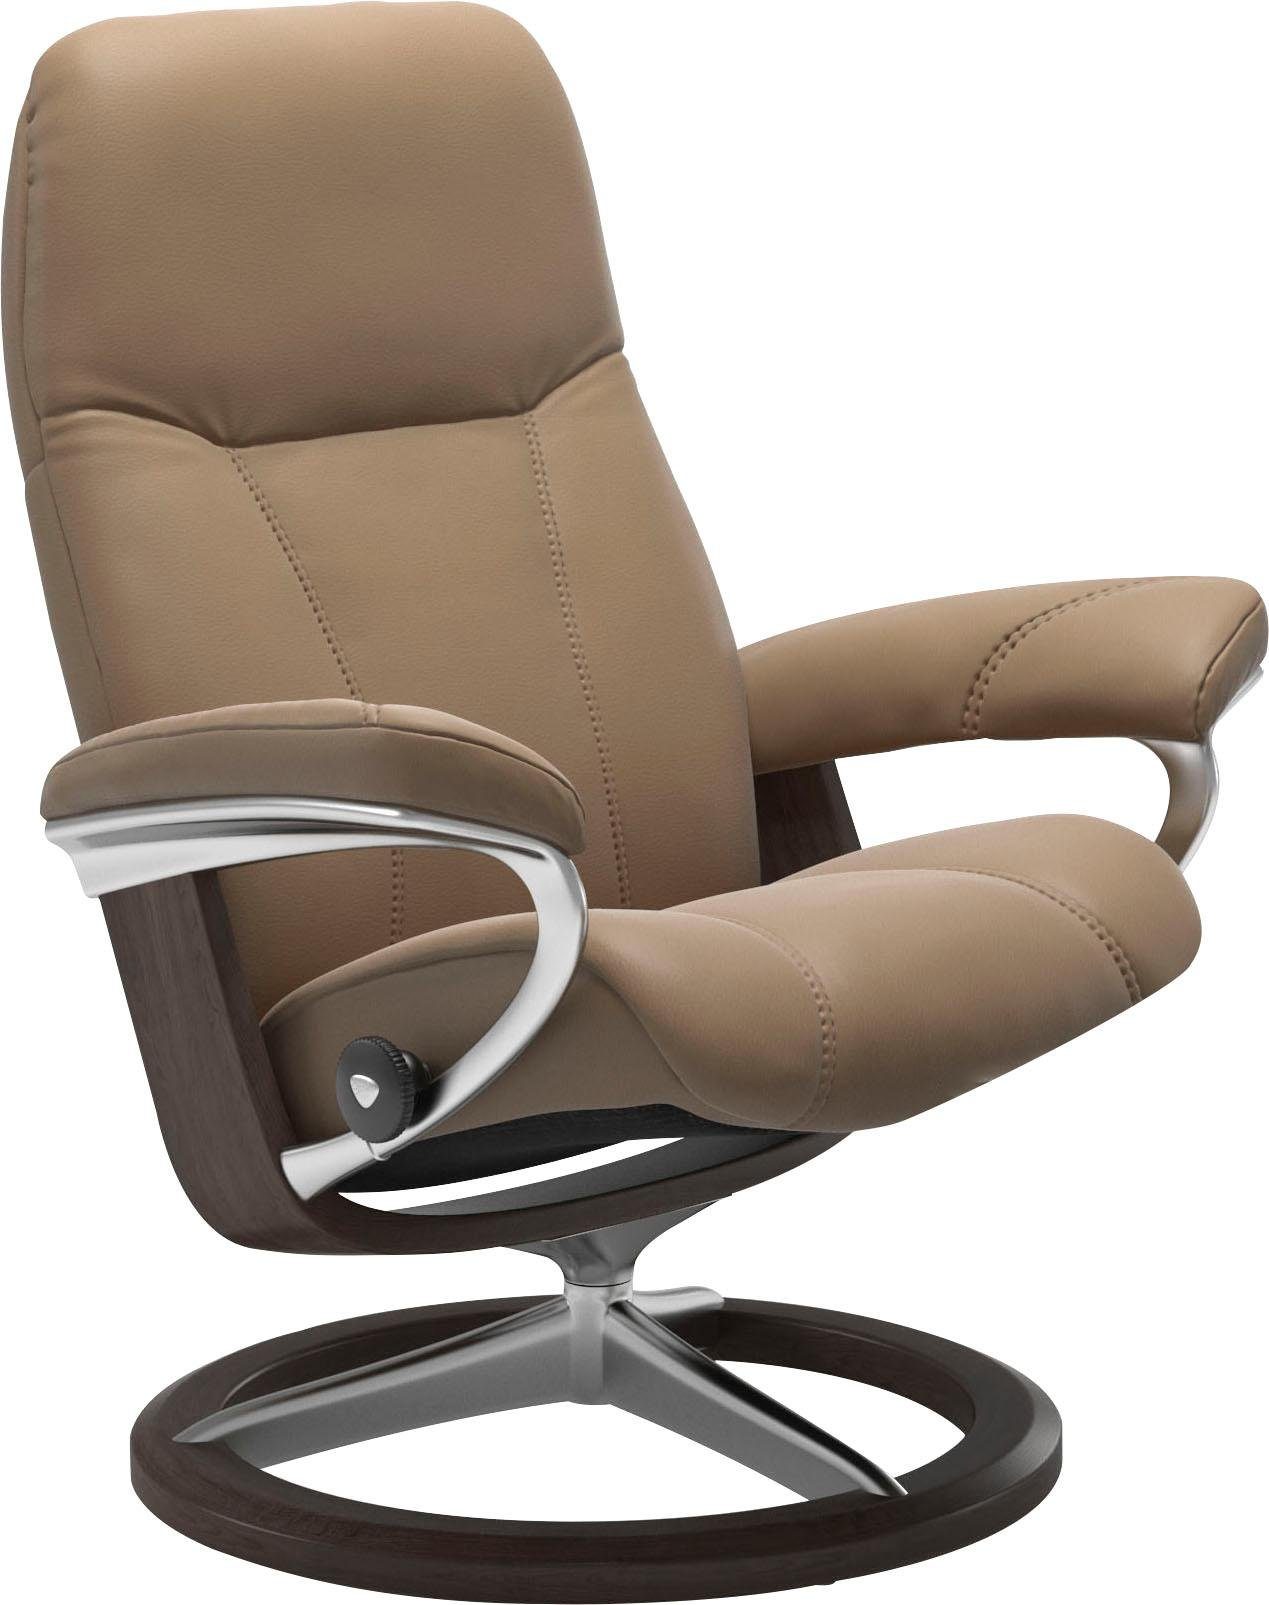 Consul, Base, Wenge Größe mit L, Signature Stressless® Relaxsessel Gestell